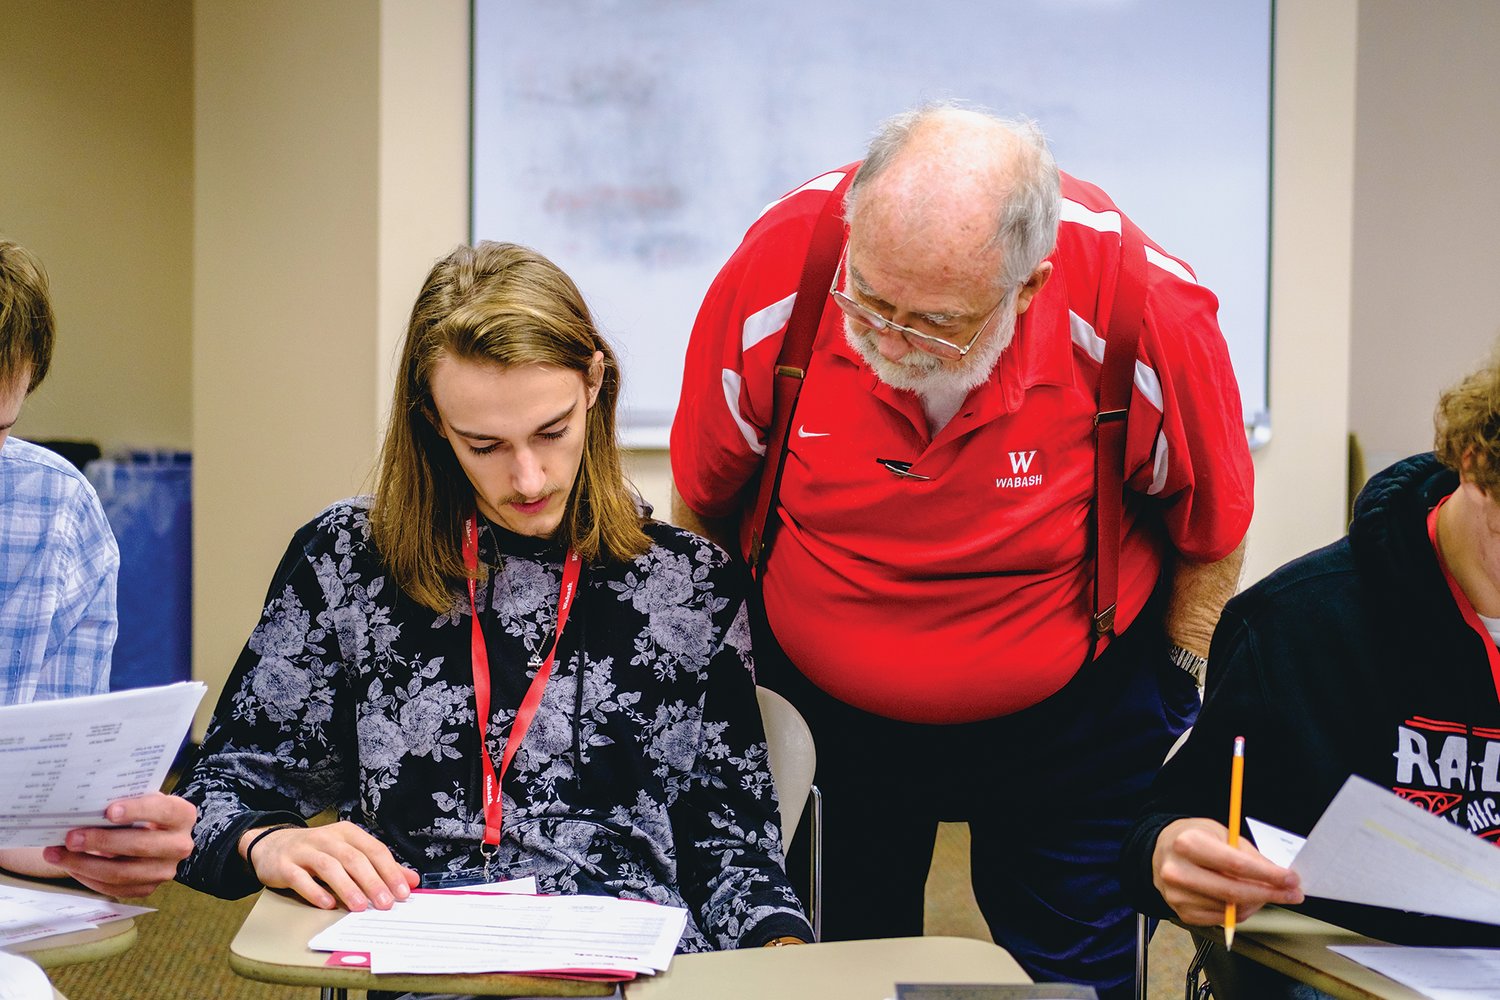 Wabash College Associate Professor of Religion David Blix, center, chats with a student during 2022 summer programming on campus in Crawfordsville.